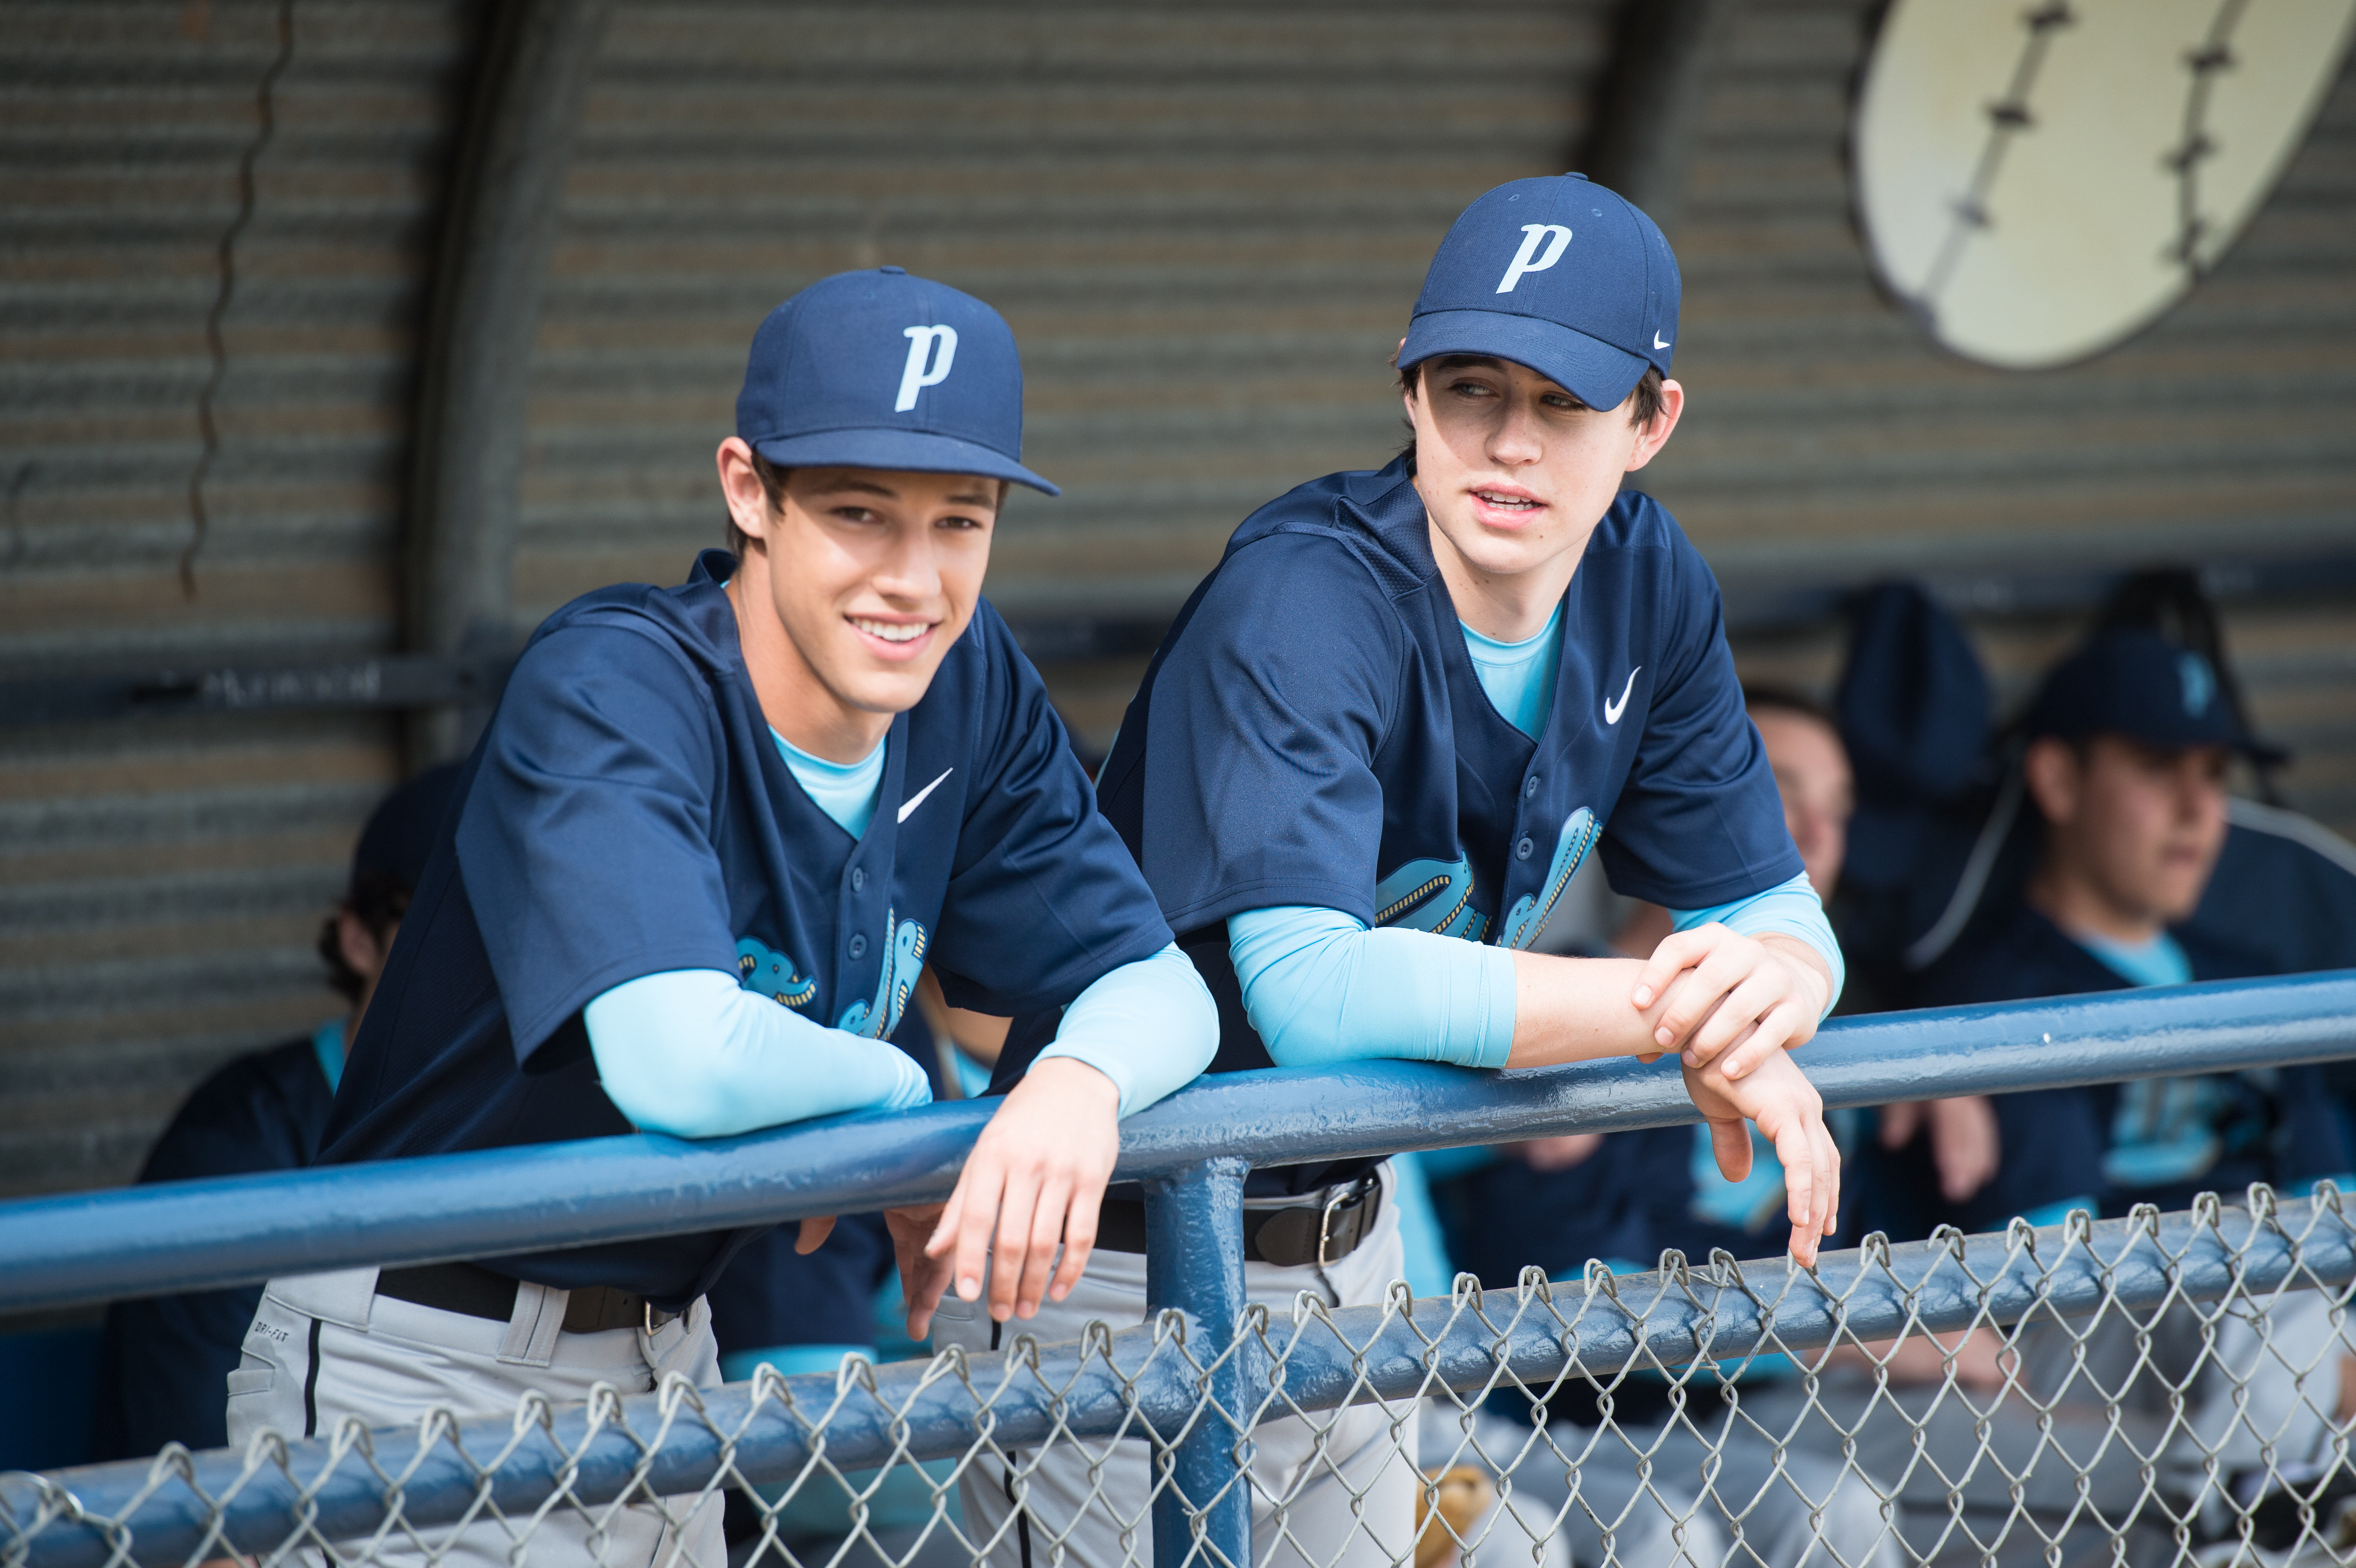 Frankie (Cameron Dallas) and Jack (Nash Grier) in the Owls dugout.